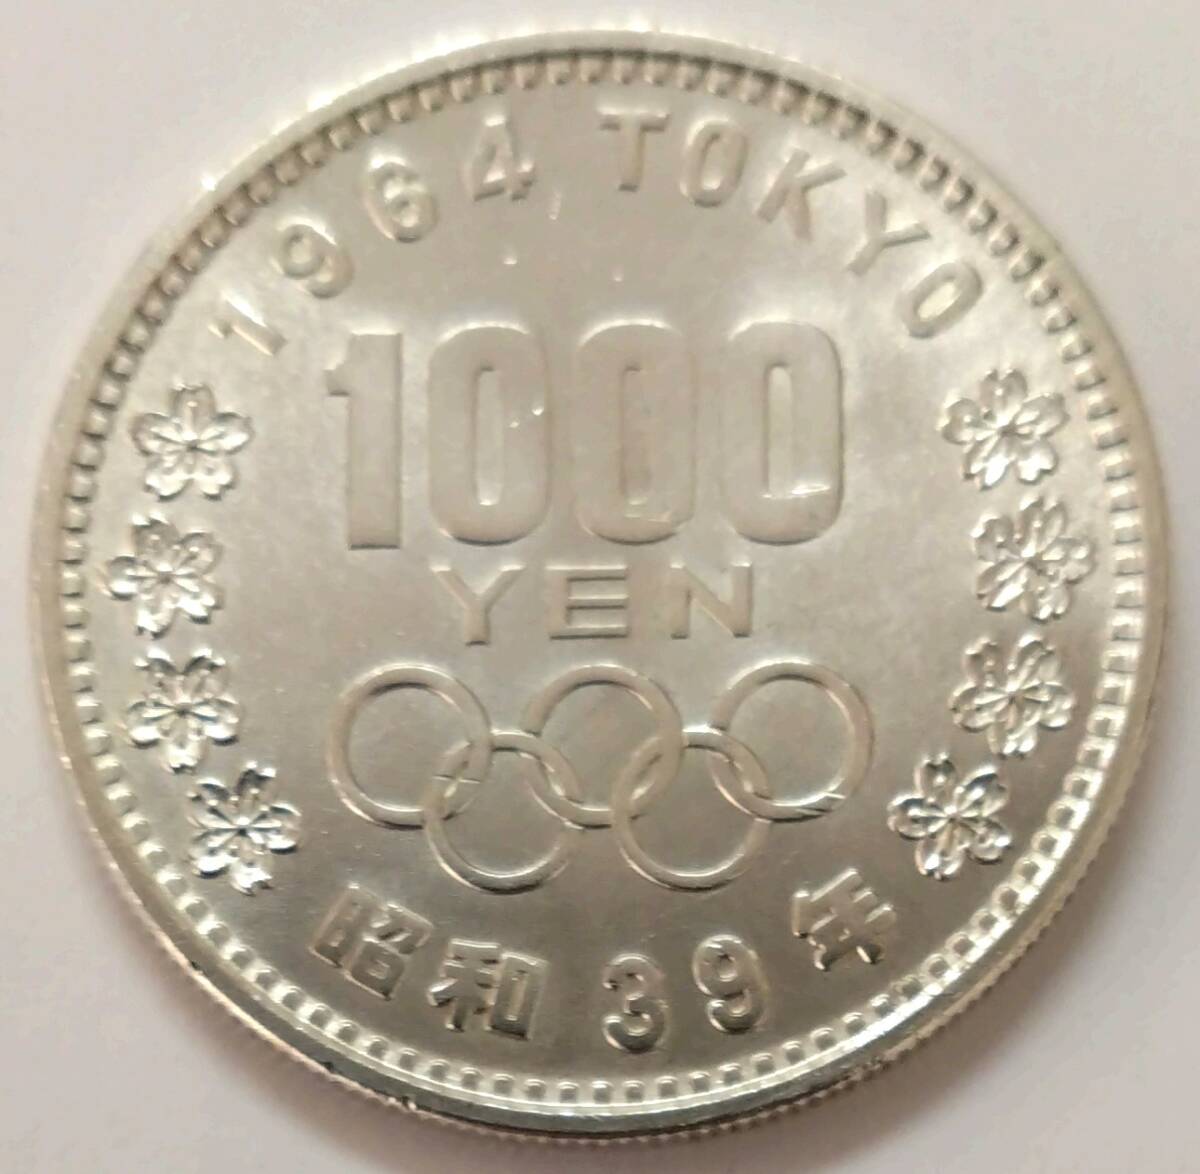 * 1964 year Showa era 39 year Tokyo Olympic memory 1000 jpy silver coin commemorative coin thousand jpy silver coin 3 sheets *